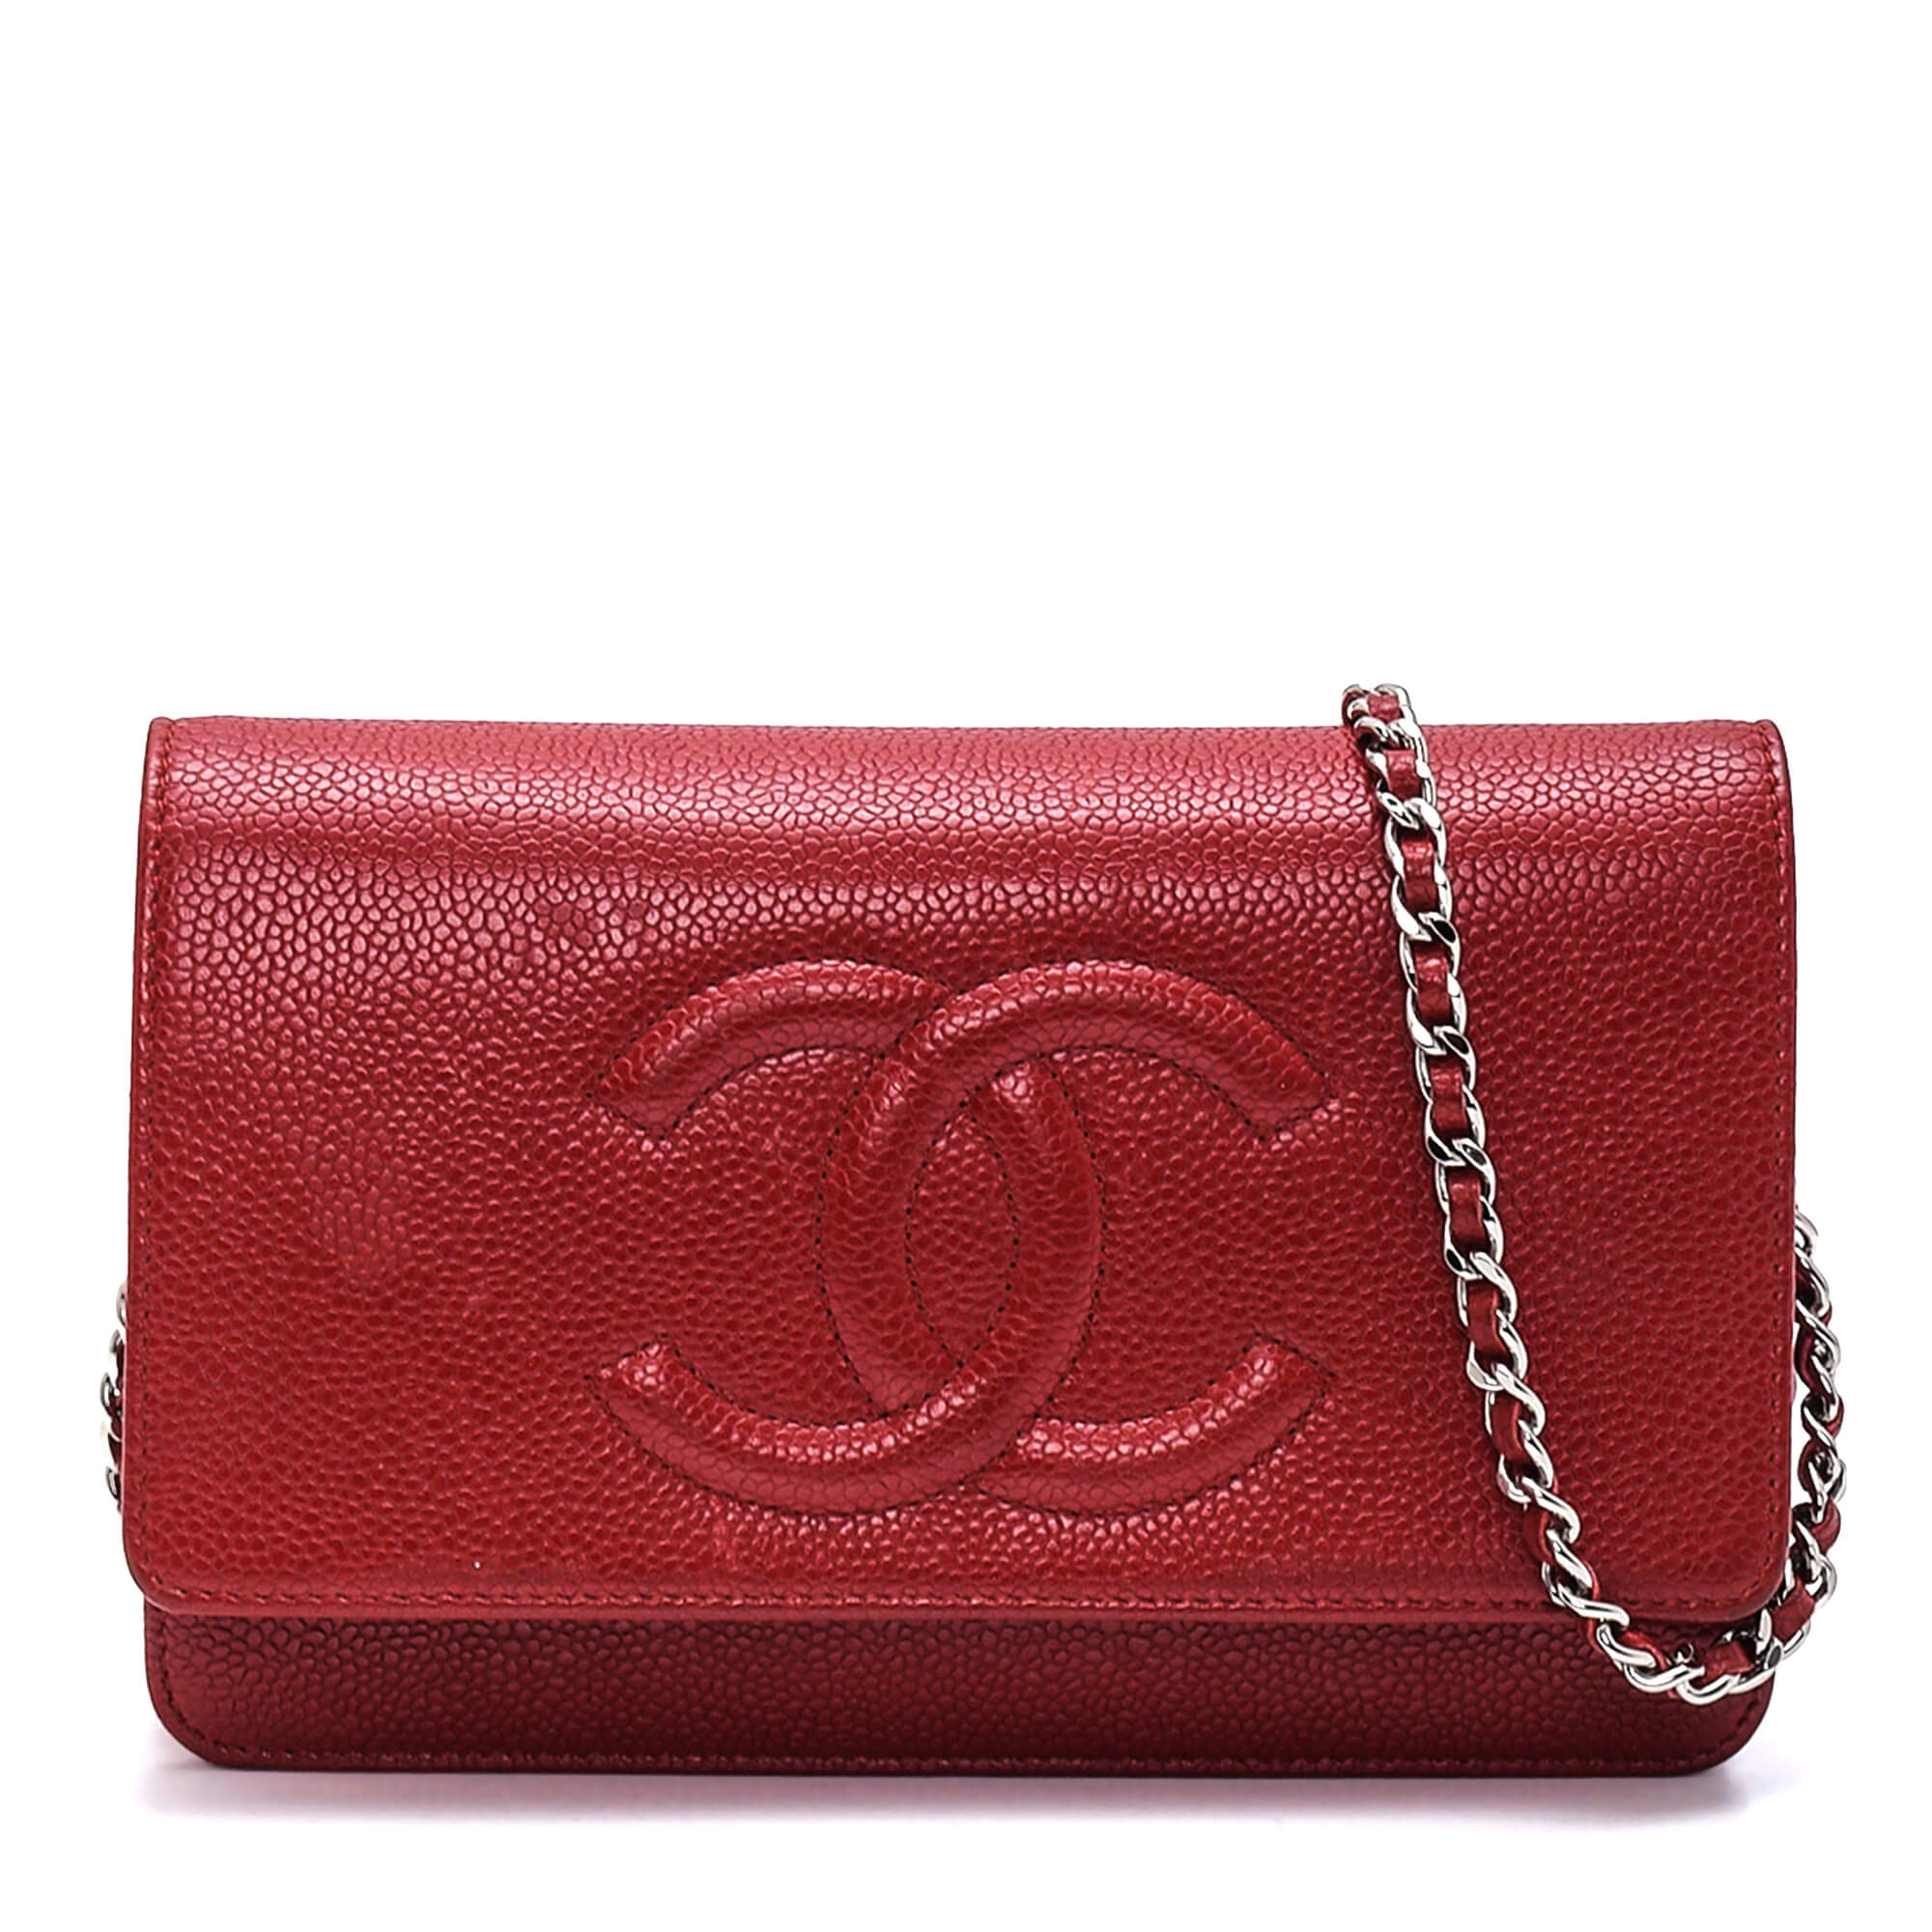 Chanel - Red Caviar Leather Wallet on Chain Bag